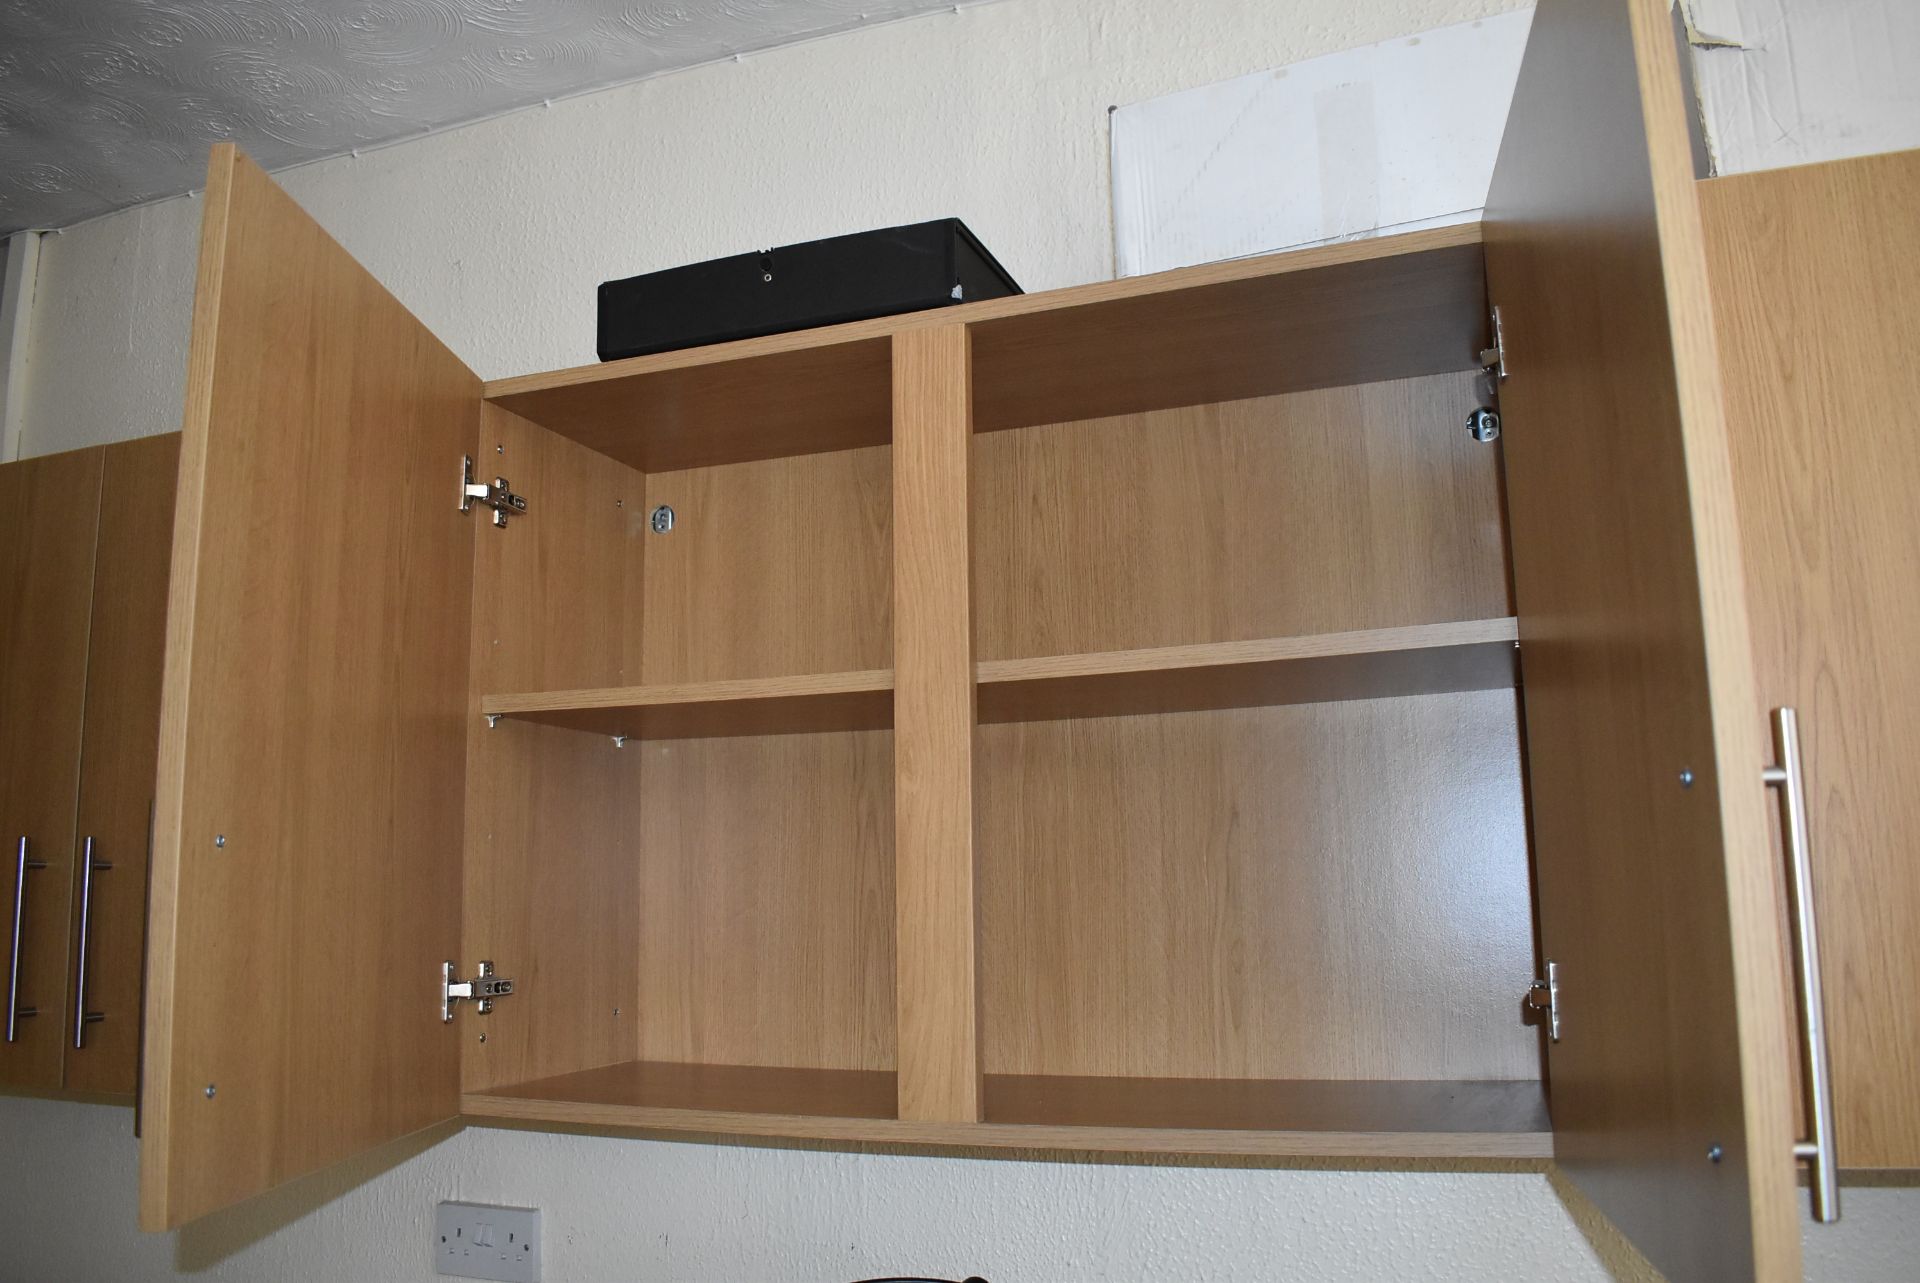 1 x Oak Fitted Kitchen Cabinets With 4m Walnut Worktop - 3 x Base, 1 x Larder and 4 x Wall Units - Image 3 of 4